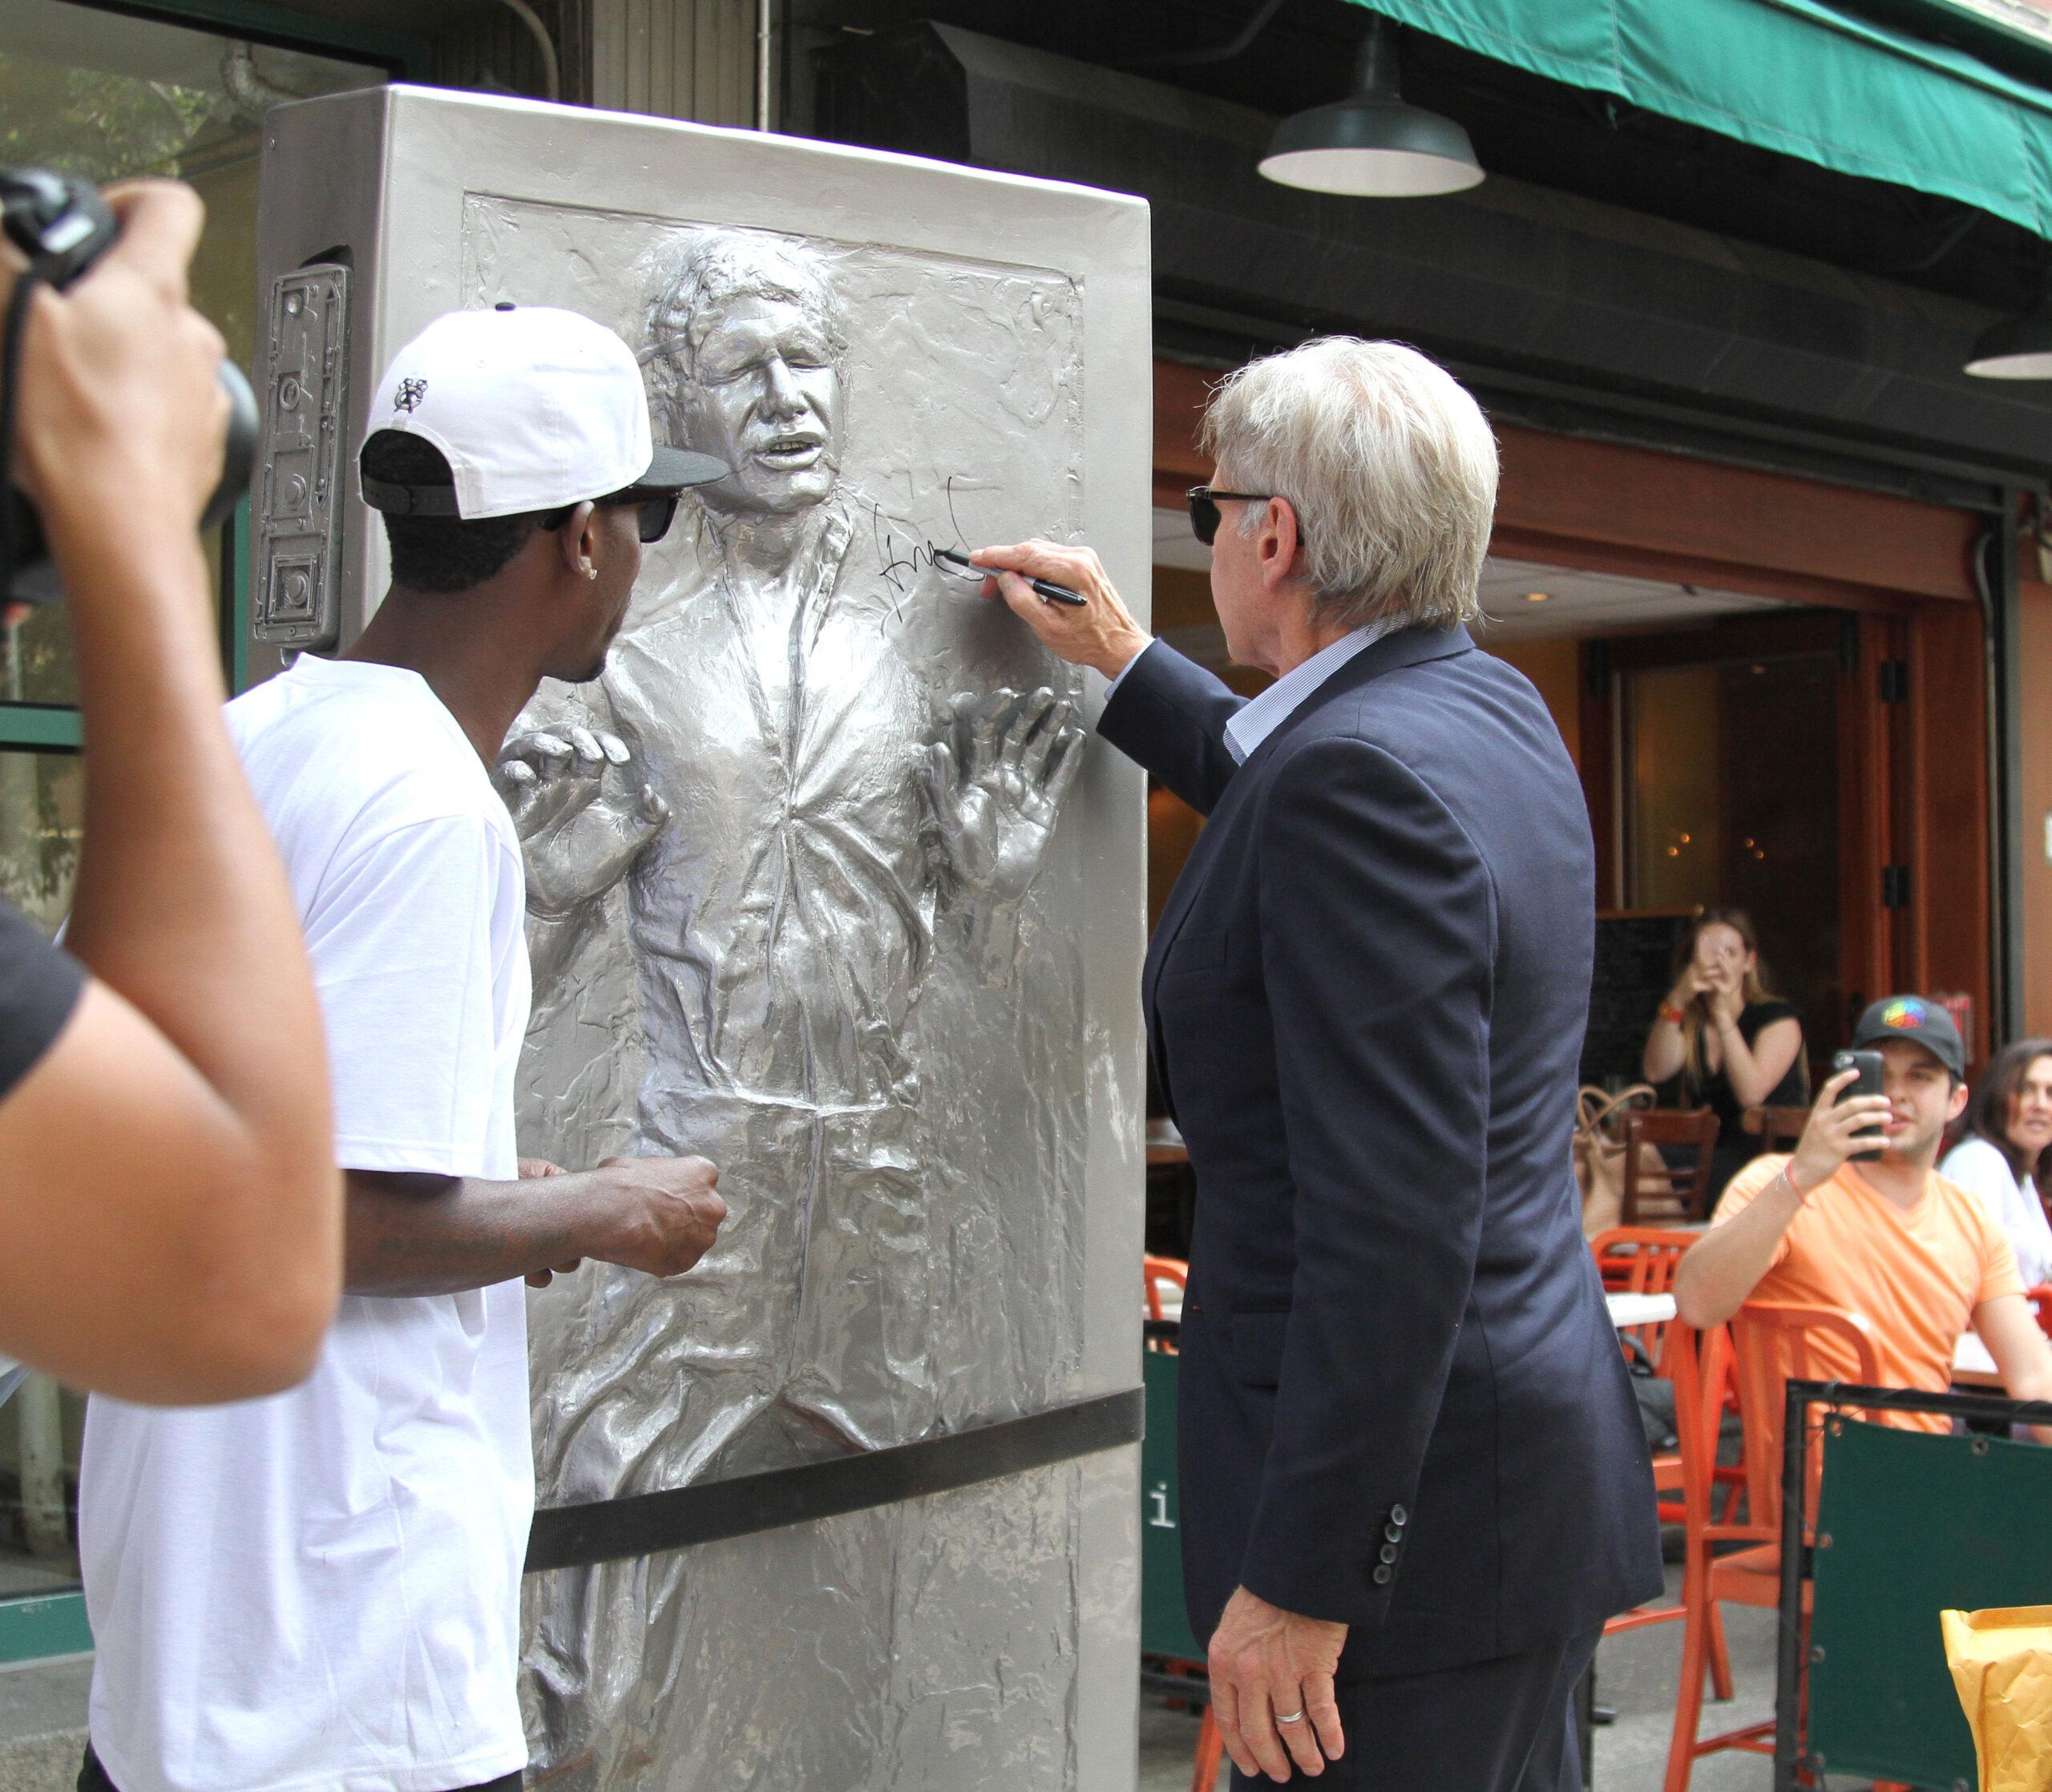 Harrison Ford signs Life-Size figure of Han Solo in Carbonite Statue and causes chaos with autograph collectors in NYC